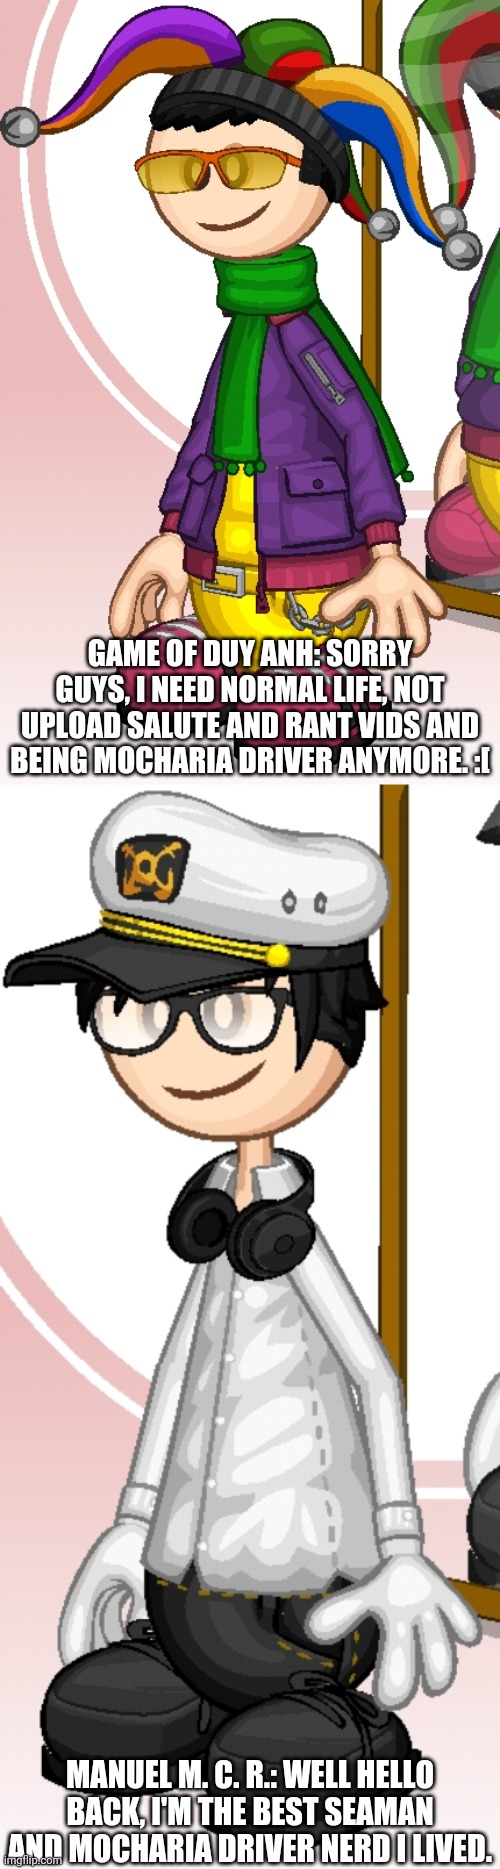 GOODBYE DUY ANH MOCHARIA DRIVER! HELLO MANUEL THE SEAMAN MOCHARIA DRIVER! | GAME OF DUY ANH: SORRY GUYS, I NEED NORMAL LIFE, NOT UPLOAD SALUTE AND RANT VIDS AND BEING MOCHARIA DRIVER ANYMORE. :[; MANUEL M. C. R.: WELL HELLO BACK, I'M THE BEST SEAMAN AND MOCHARIA DRIVER NERD I LIVED. | image tagged in game of duy anh,papa's mocharia,flipline,gameria,funny,manuel m c r | made w/ Imgflip meme maker